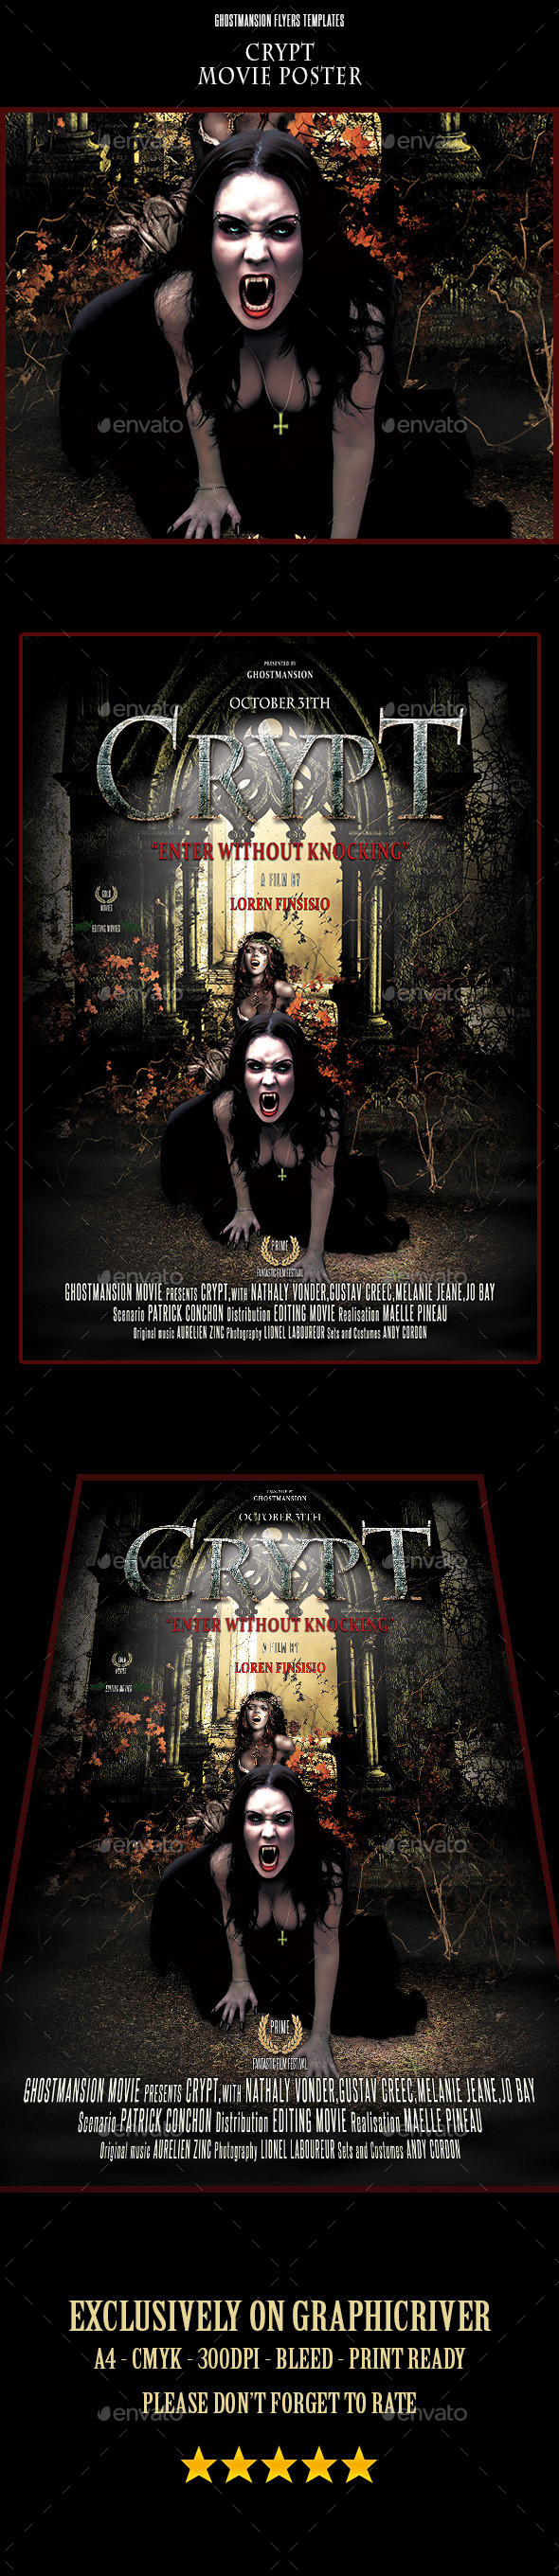 Graphicriver 8876334 crypt movie poster inline image preview source